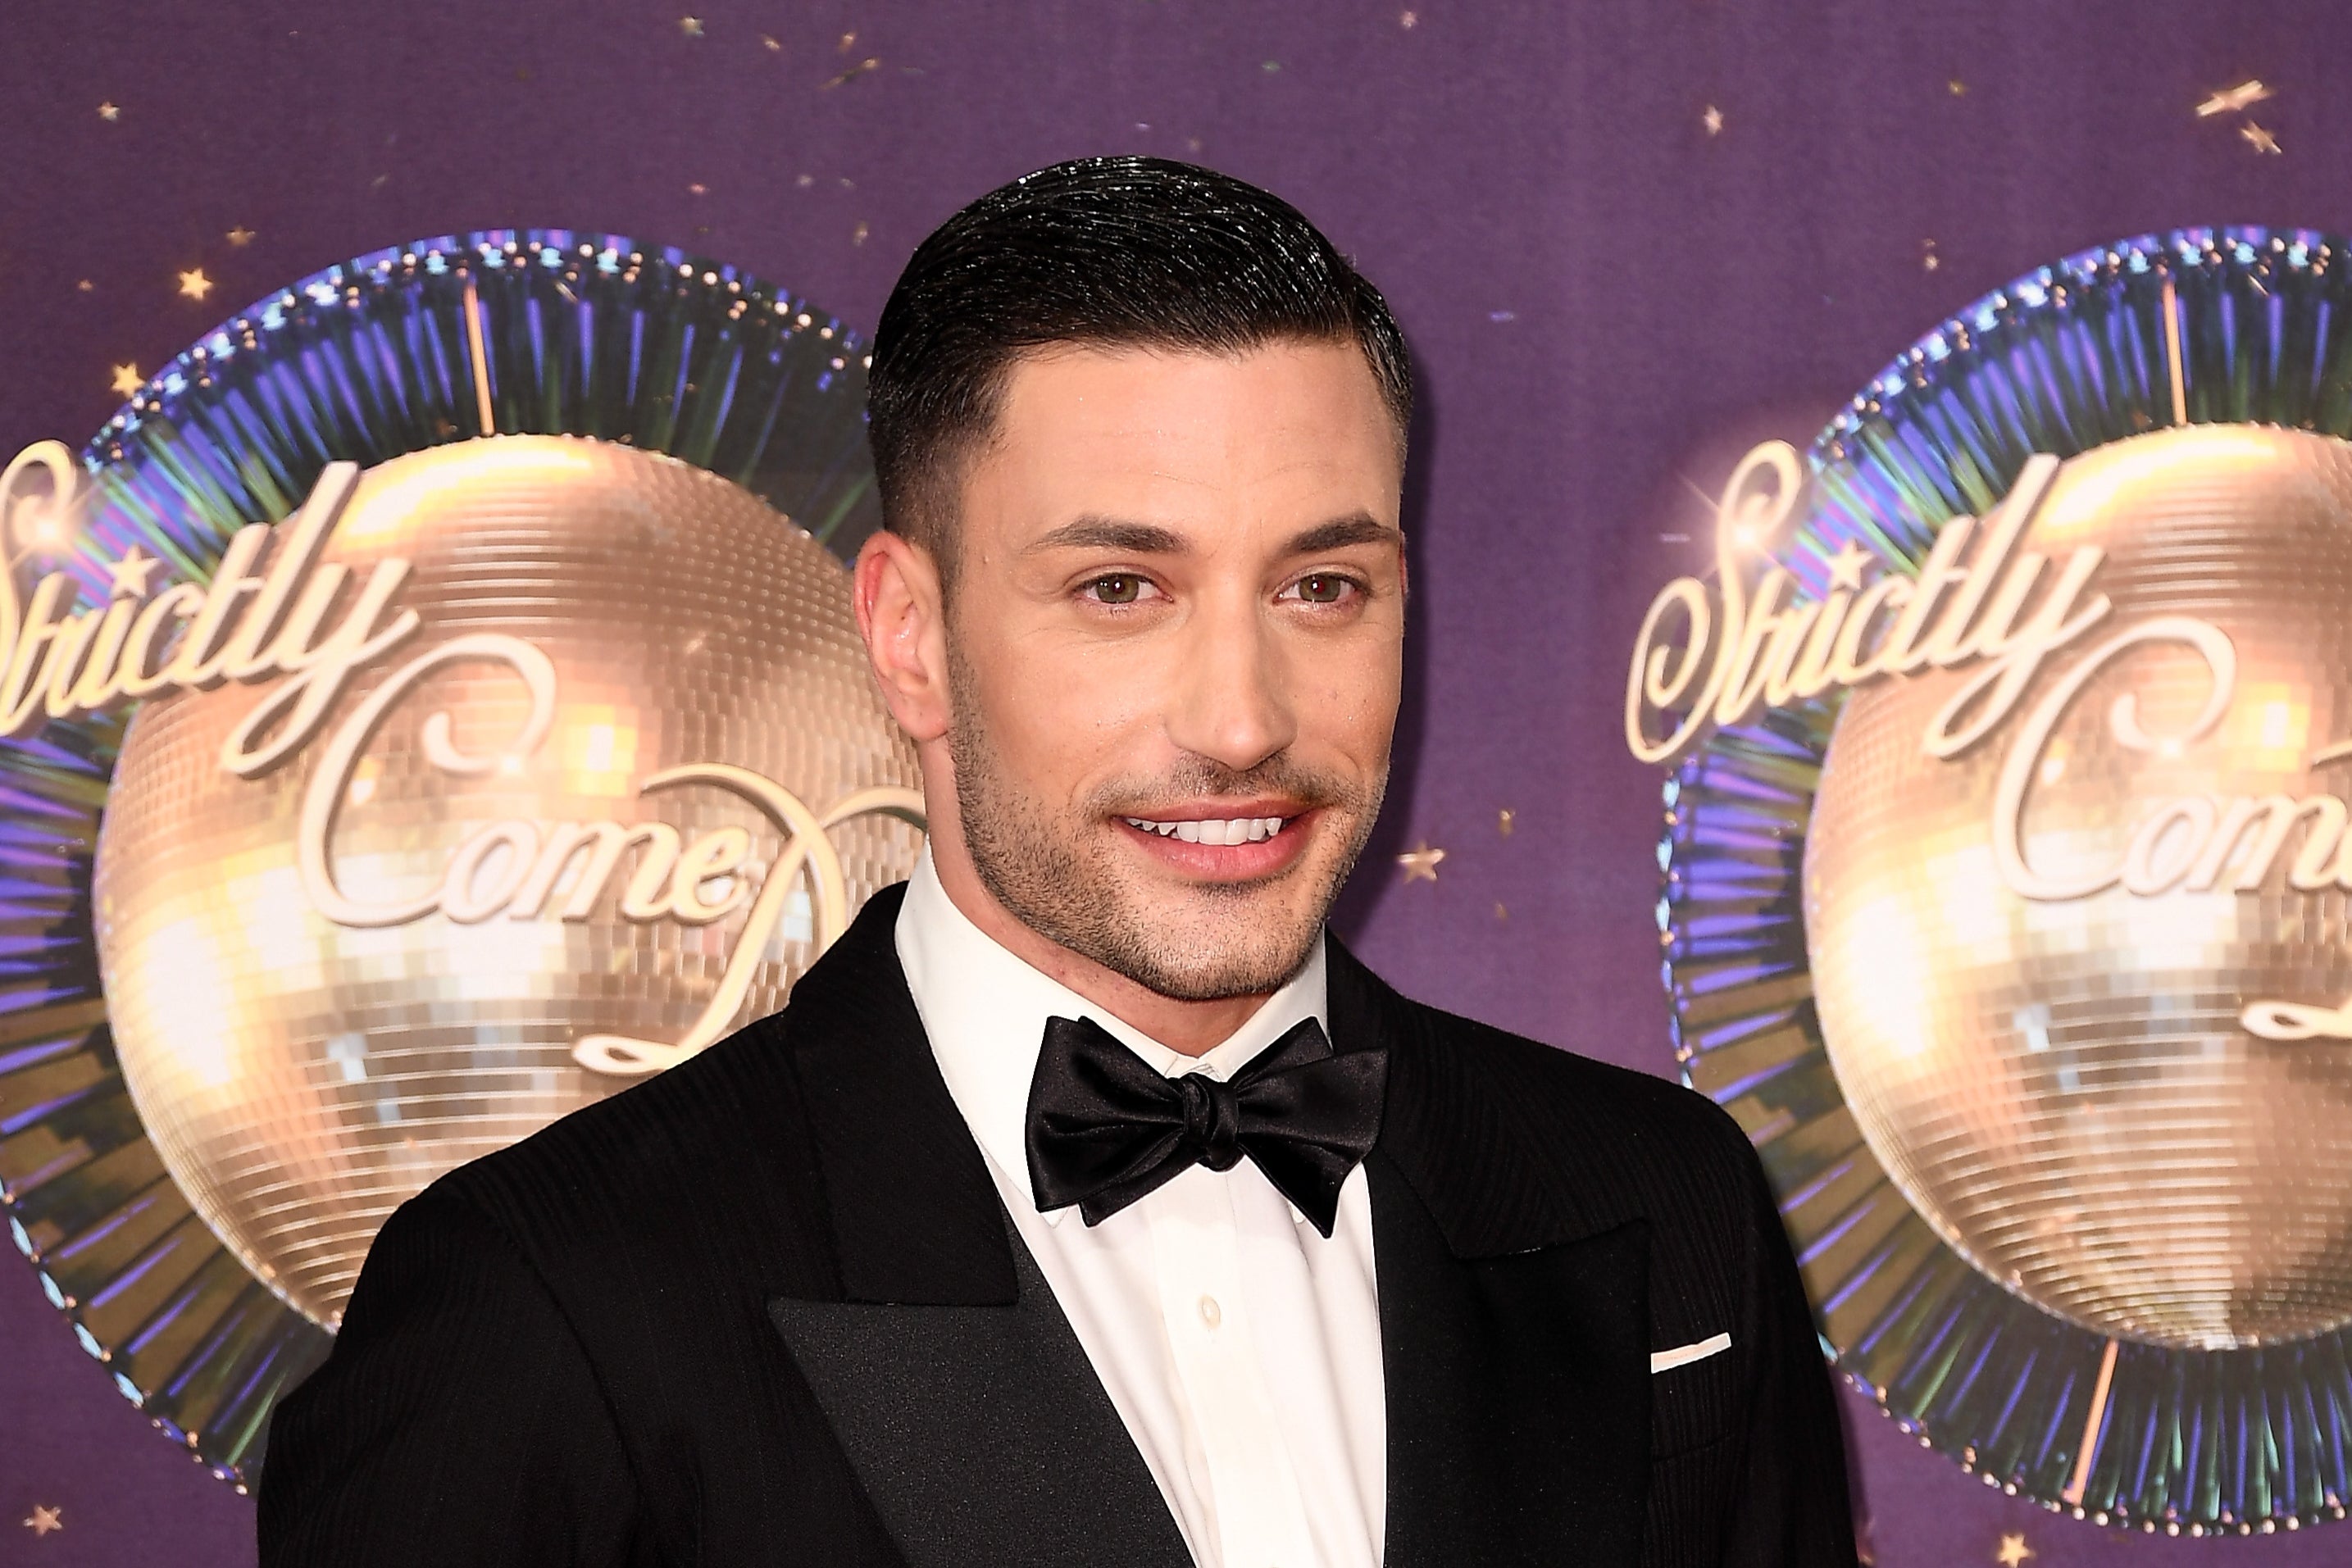 Pernice joined ‘Strictly’ in 2015